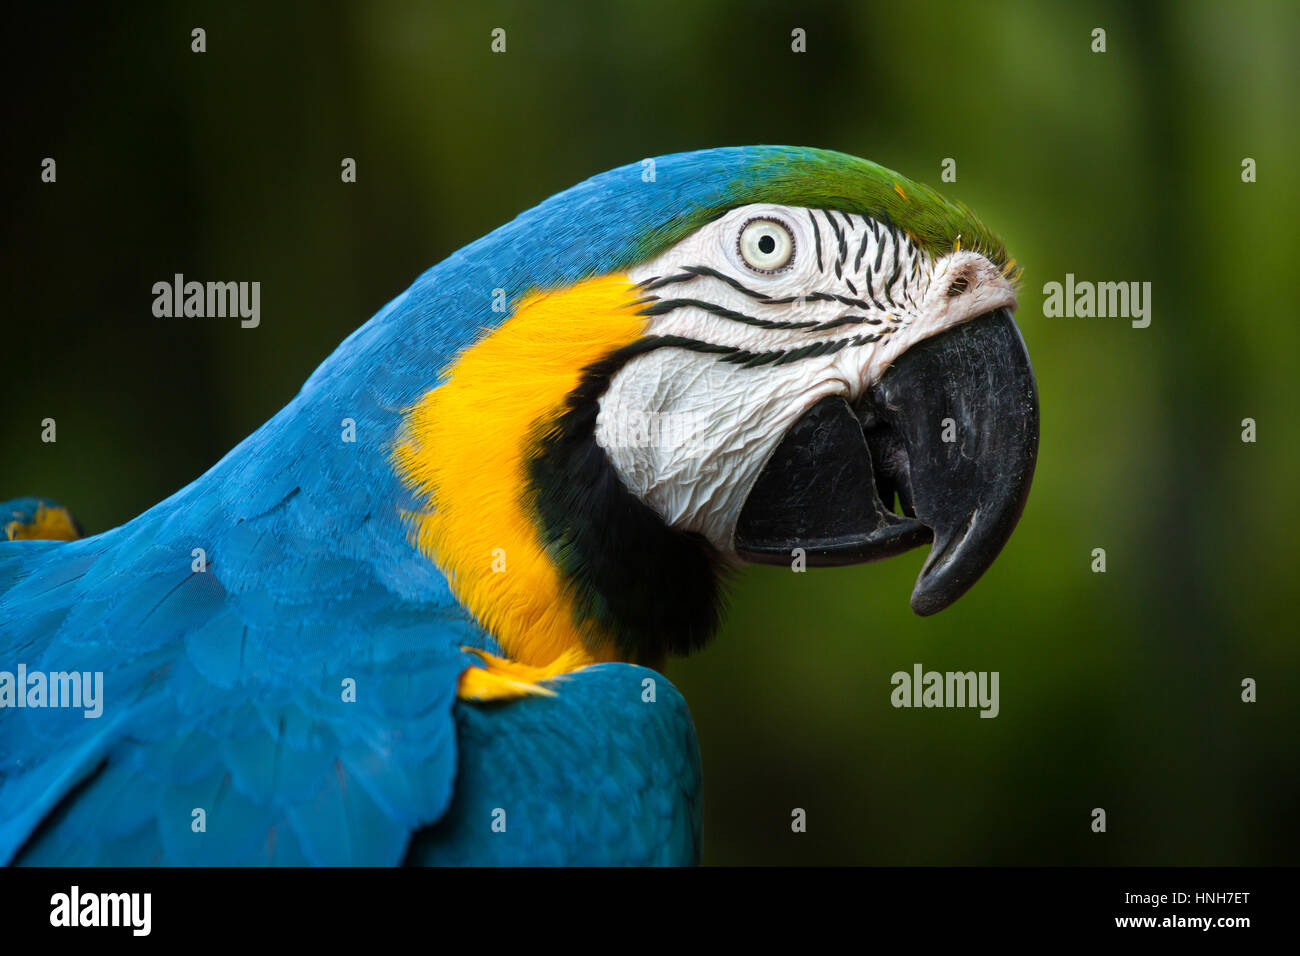 Blue-and-yellow macaw (Ara ararauna), also known as the blue-and-gold macaw. Stock Photo